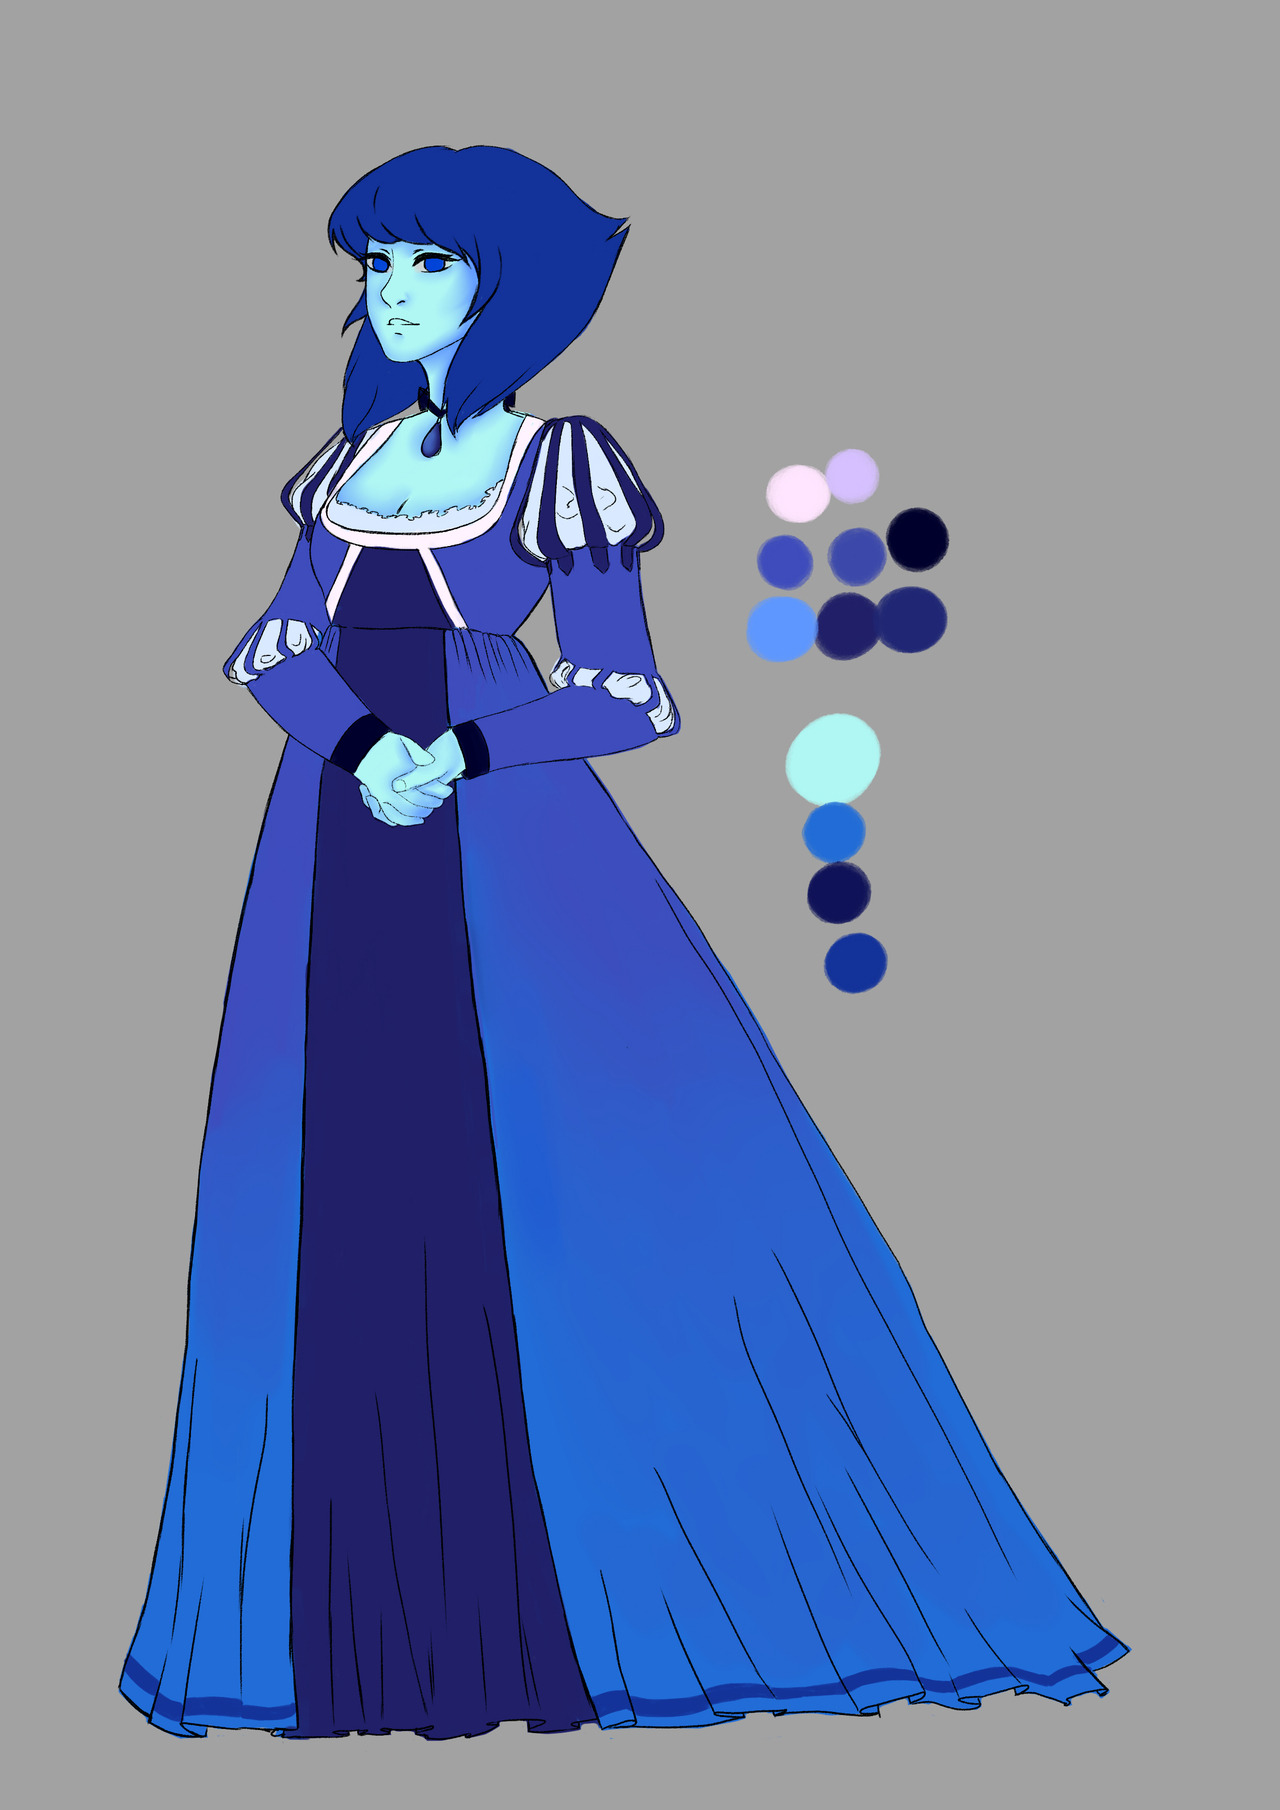 So after a post I saw regarding Lapis cosplay designs, I might have gotten a little inspired and whipped something up! I do envision it with more details—bead work and pearls and the like, but I’m too...